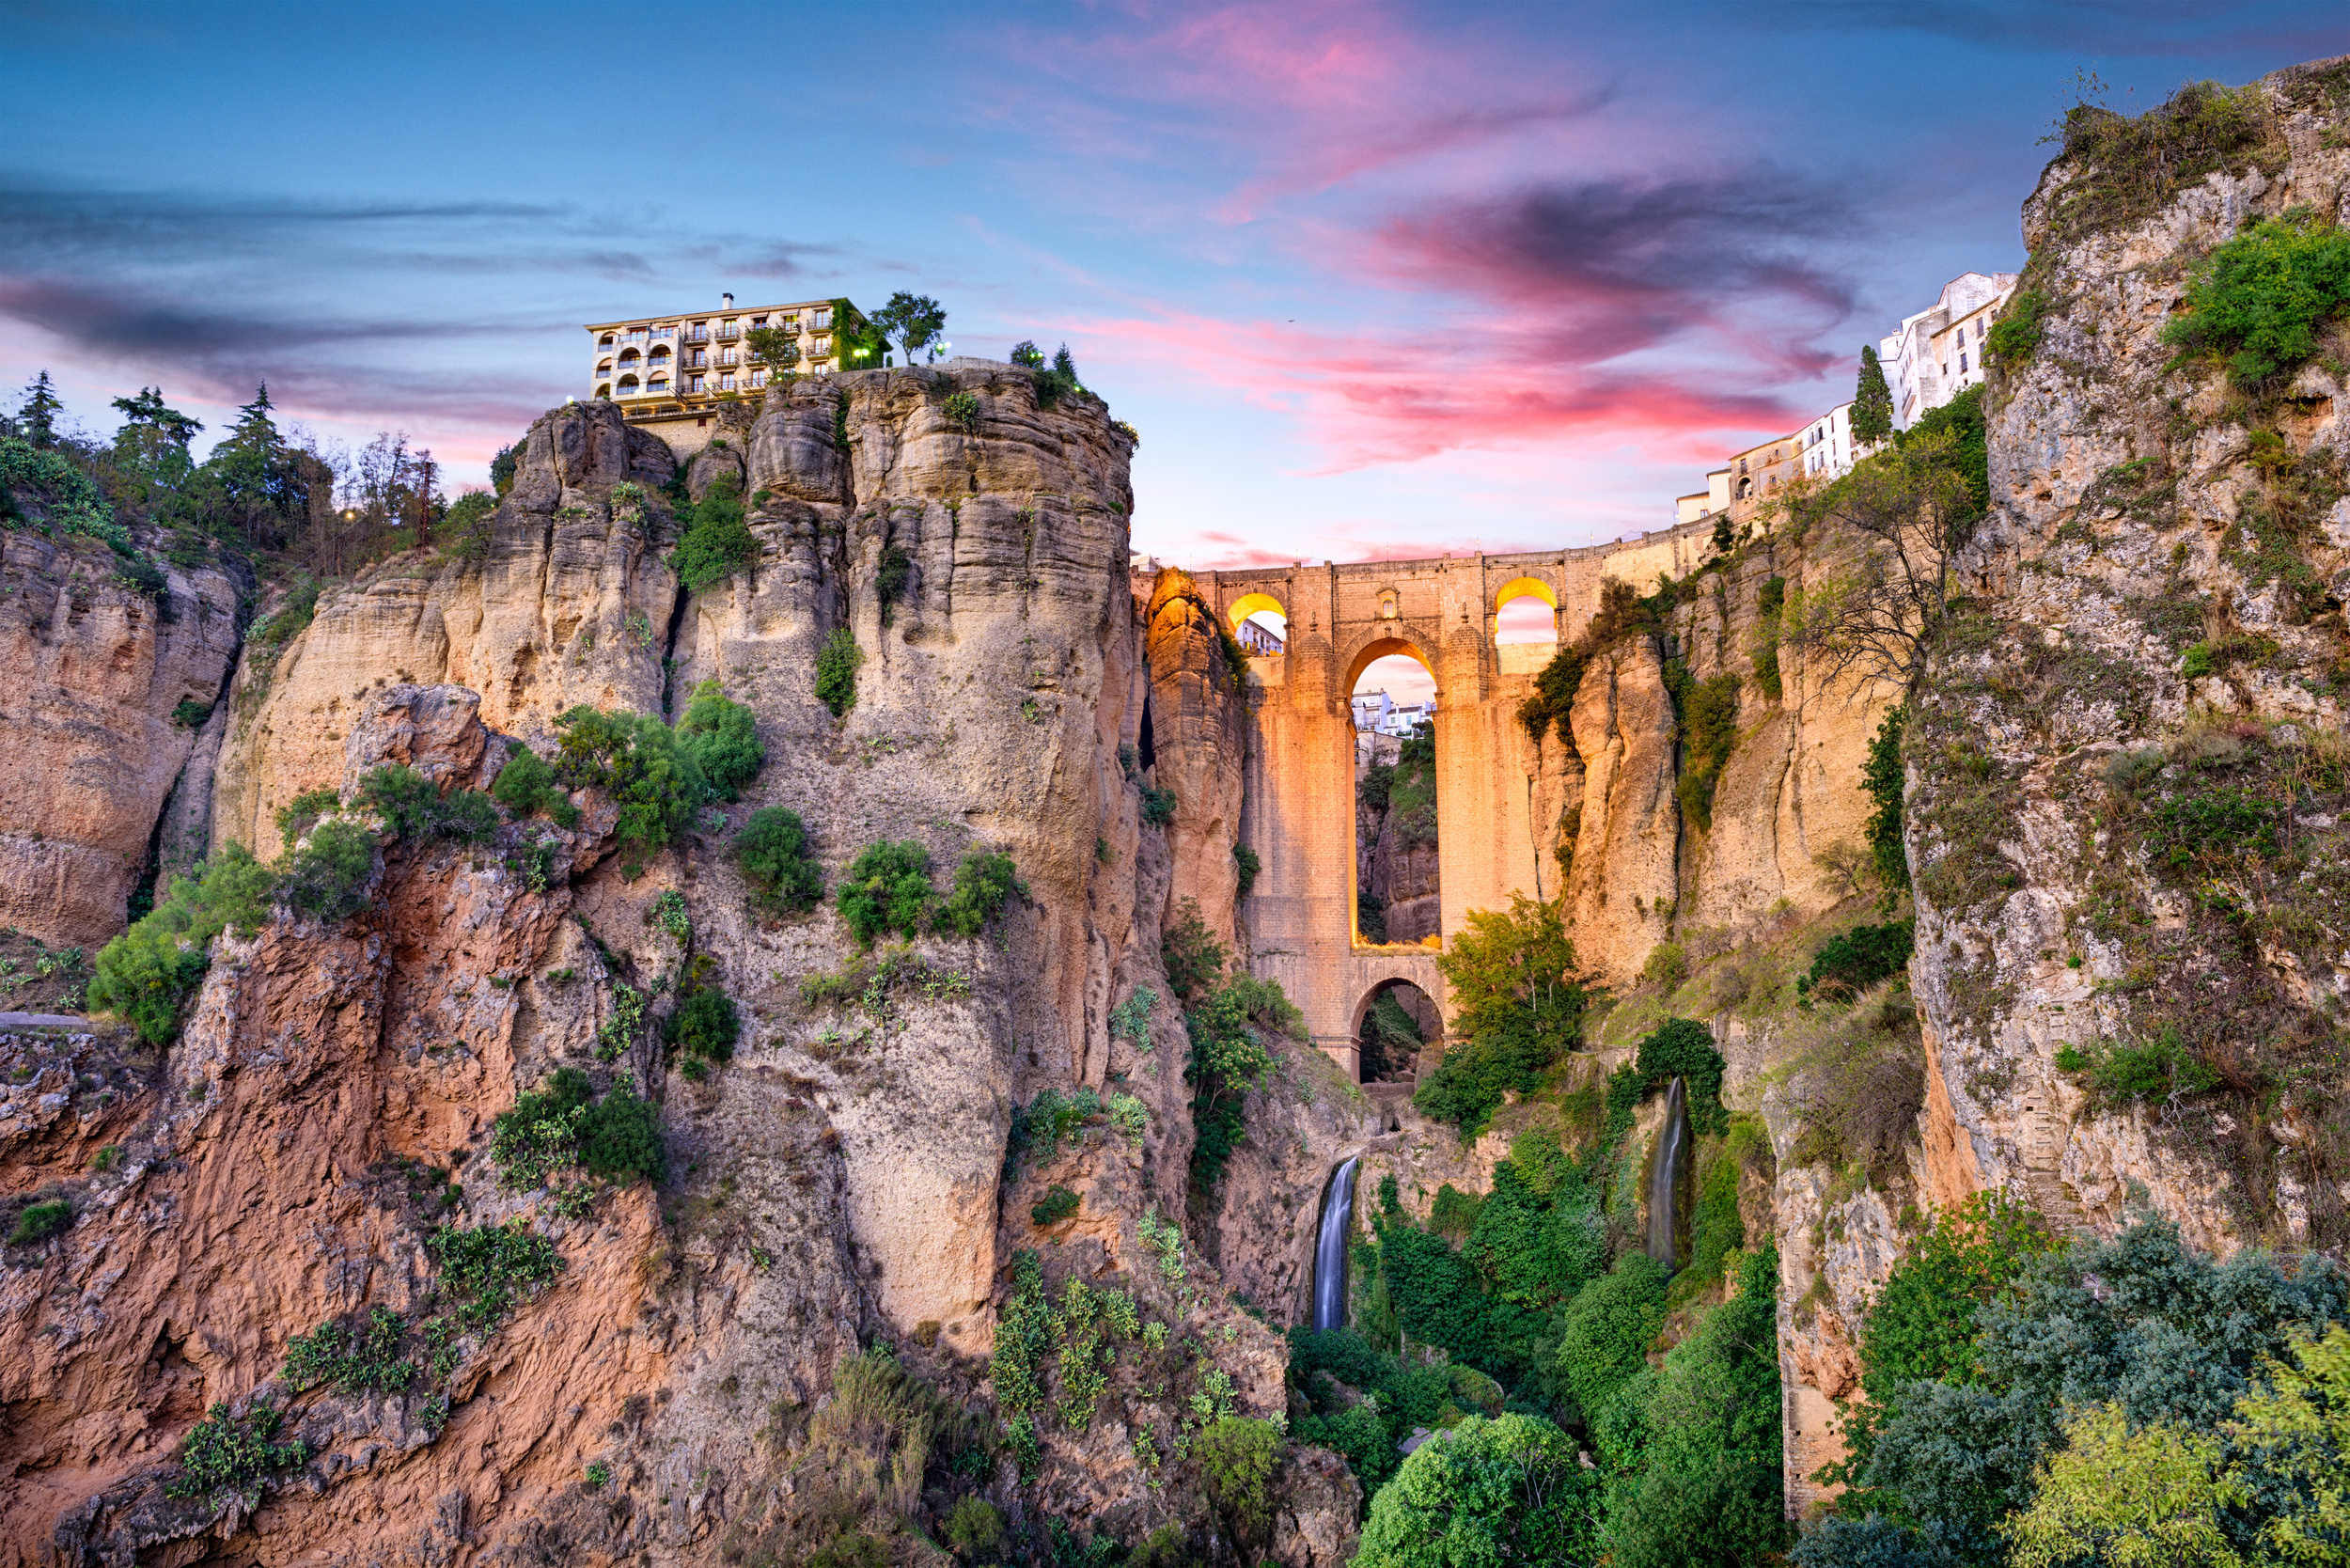 <p>Ronda is a wonderful respite to nearby Malaga. Split by the El Tajo Gorge, the town's dramatic appearance is just one piece of its appeal. Walk the Puente Nuevo, the “New Bridge," and others that connect the two sides of the town. Once you’ve had enough exercise, visit the historic bullring or go wine tasting in the surrounding hillside.</p><p>You may also like: <a href='https://www.yardbarker.com/lifestyle/articles/how_old_are_these_20_iconic_snack_food_companies_021124/s1__23223418'>How old are these 20 iconic snack food companies?</a></p>